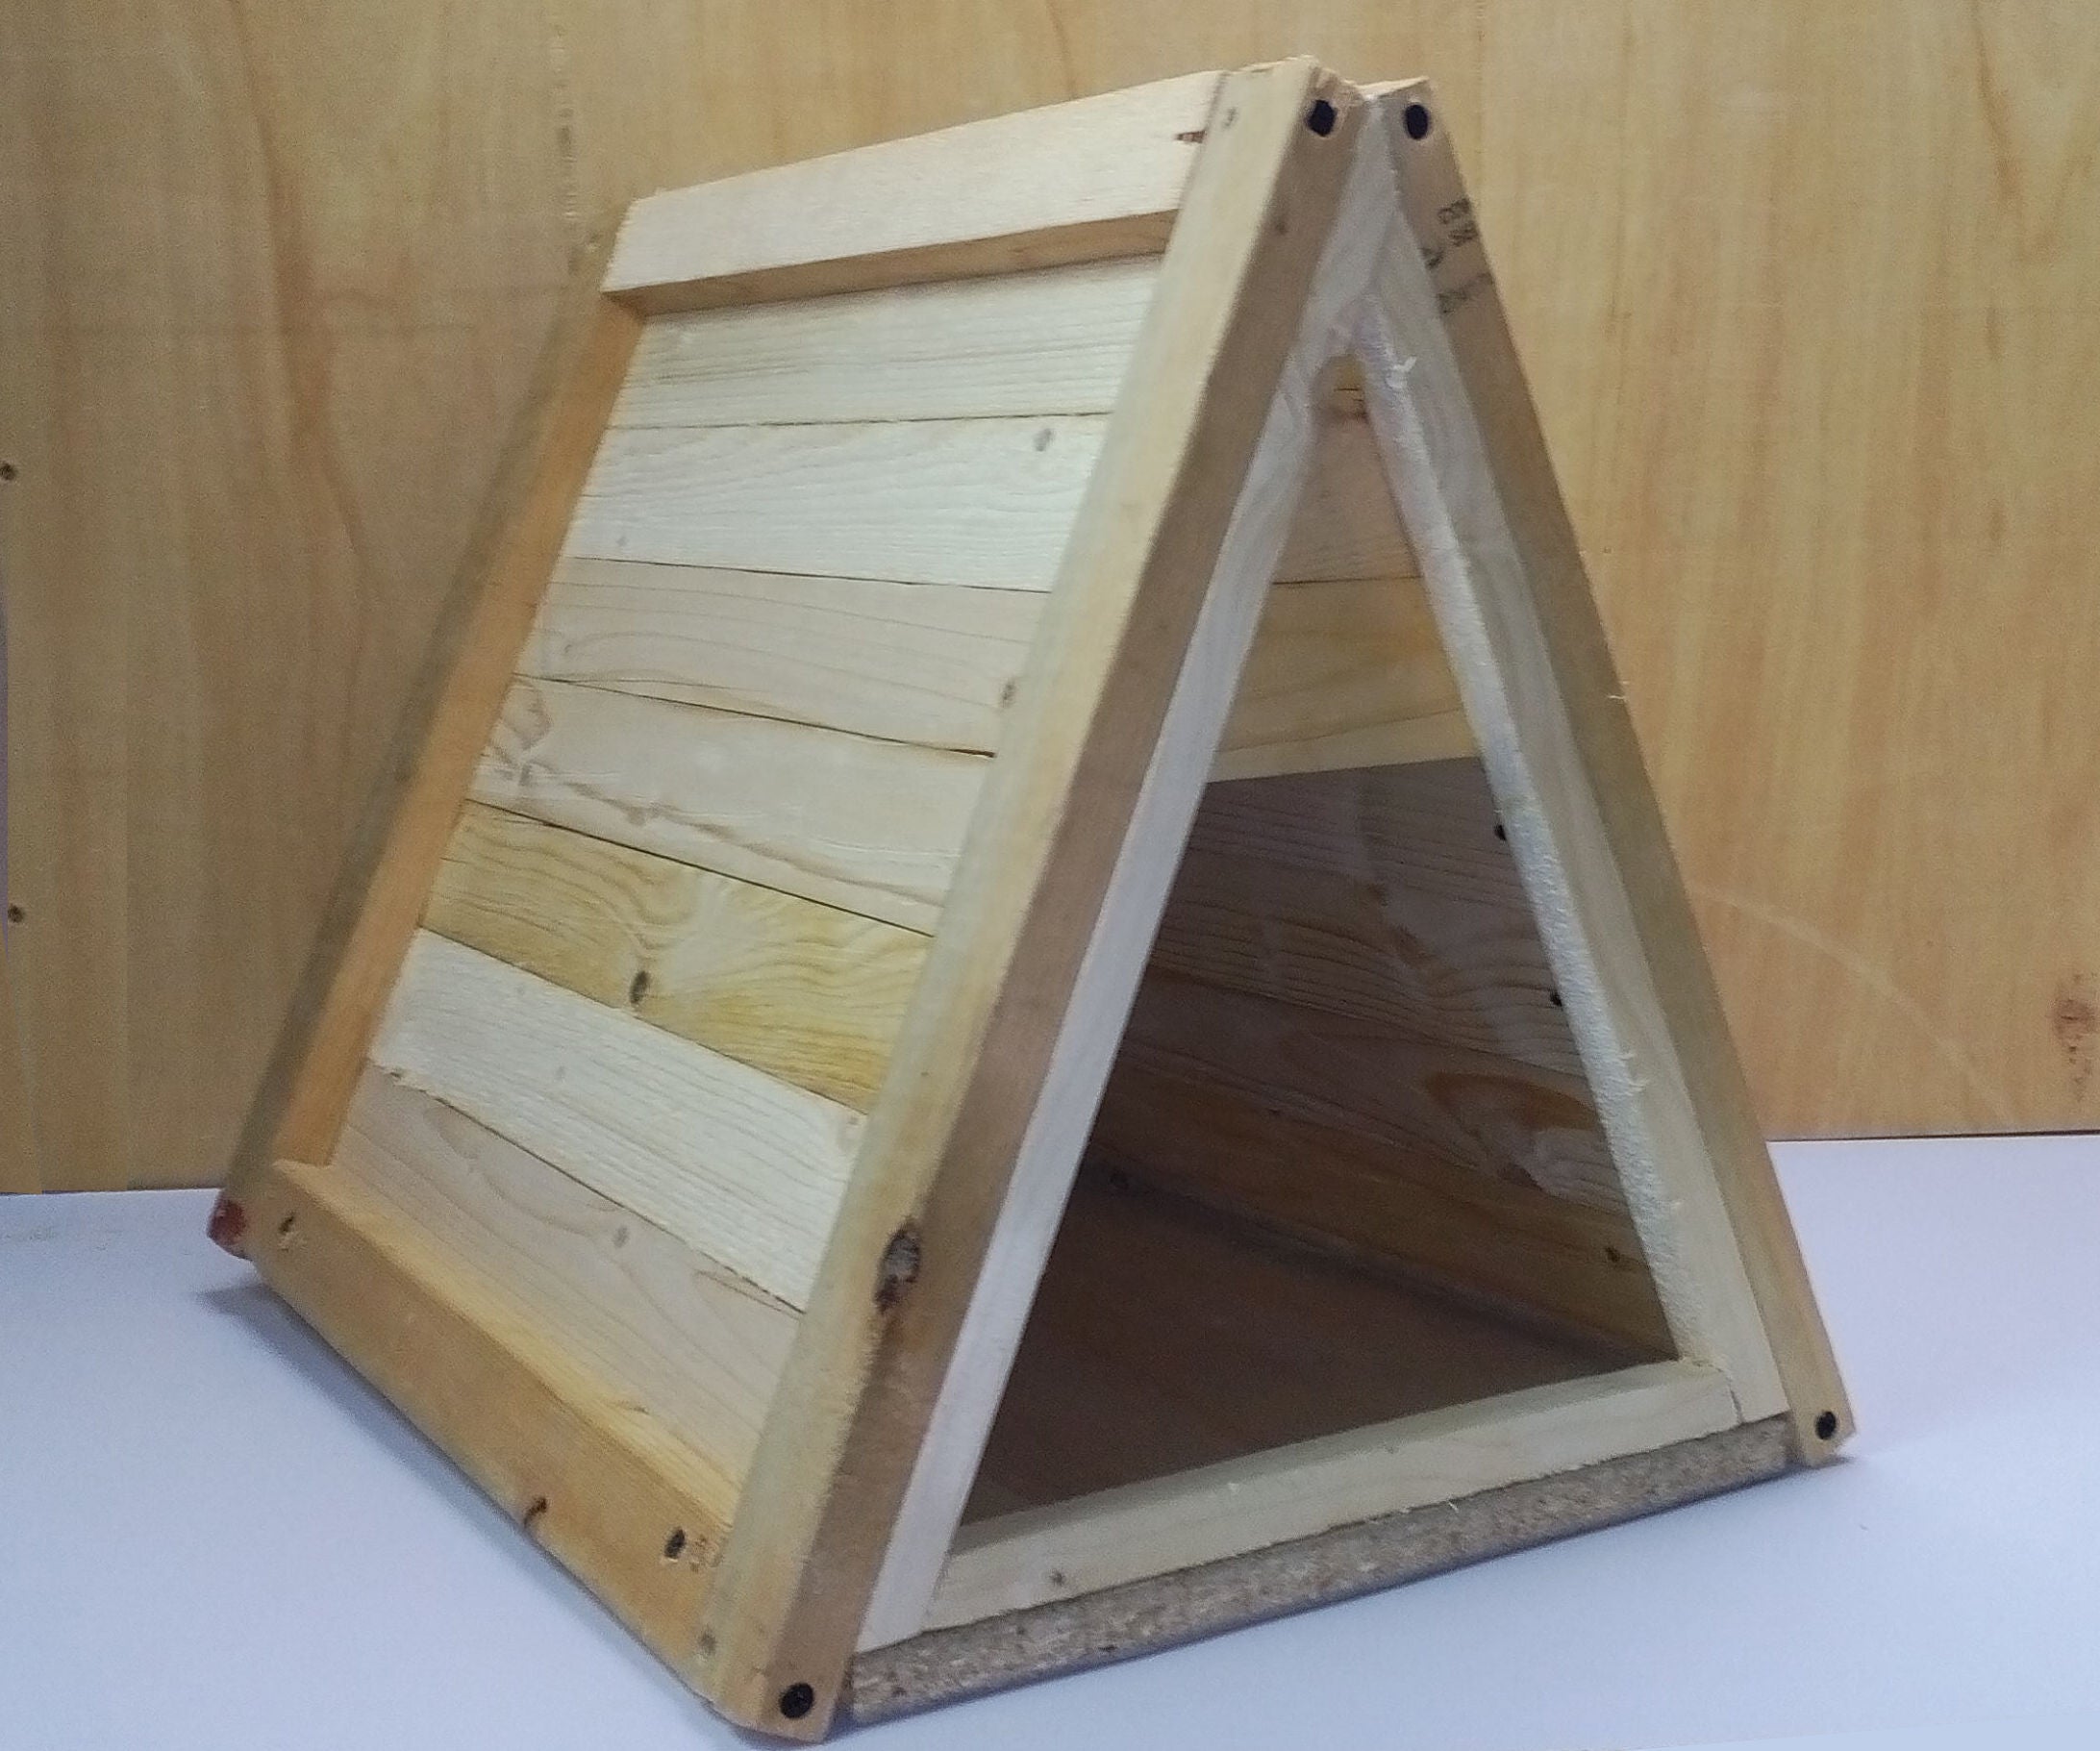  Triangle Wooden Pet House